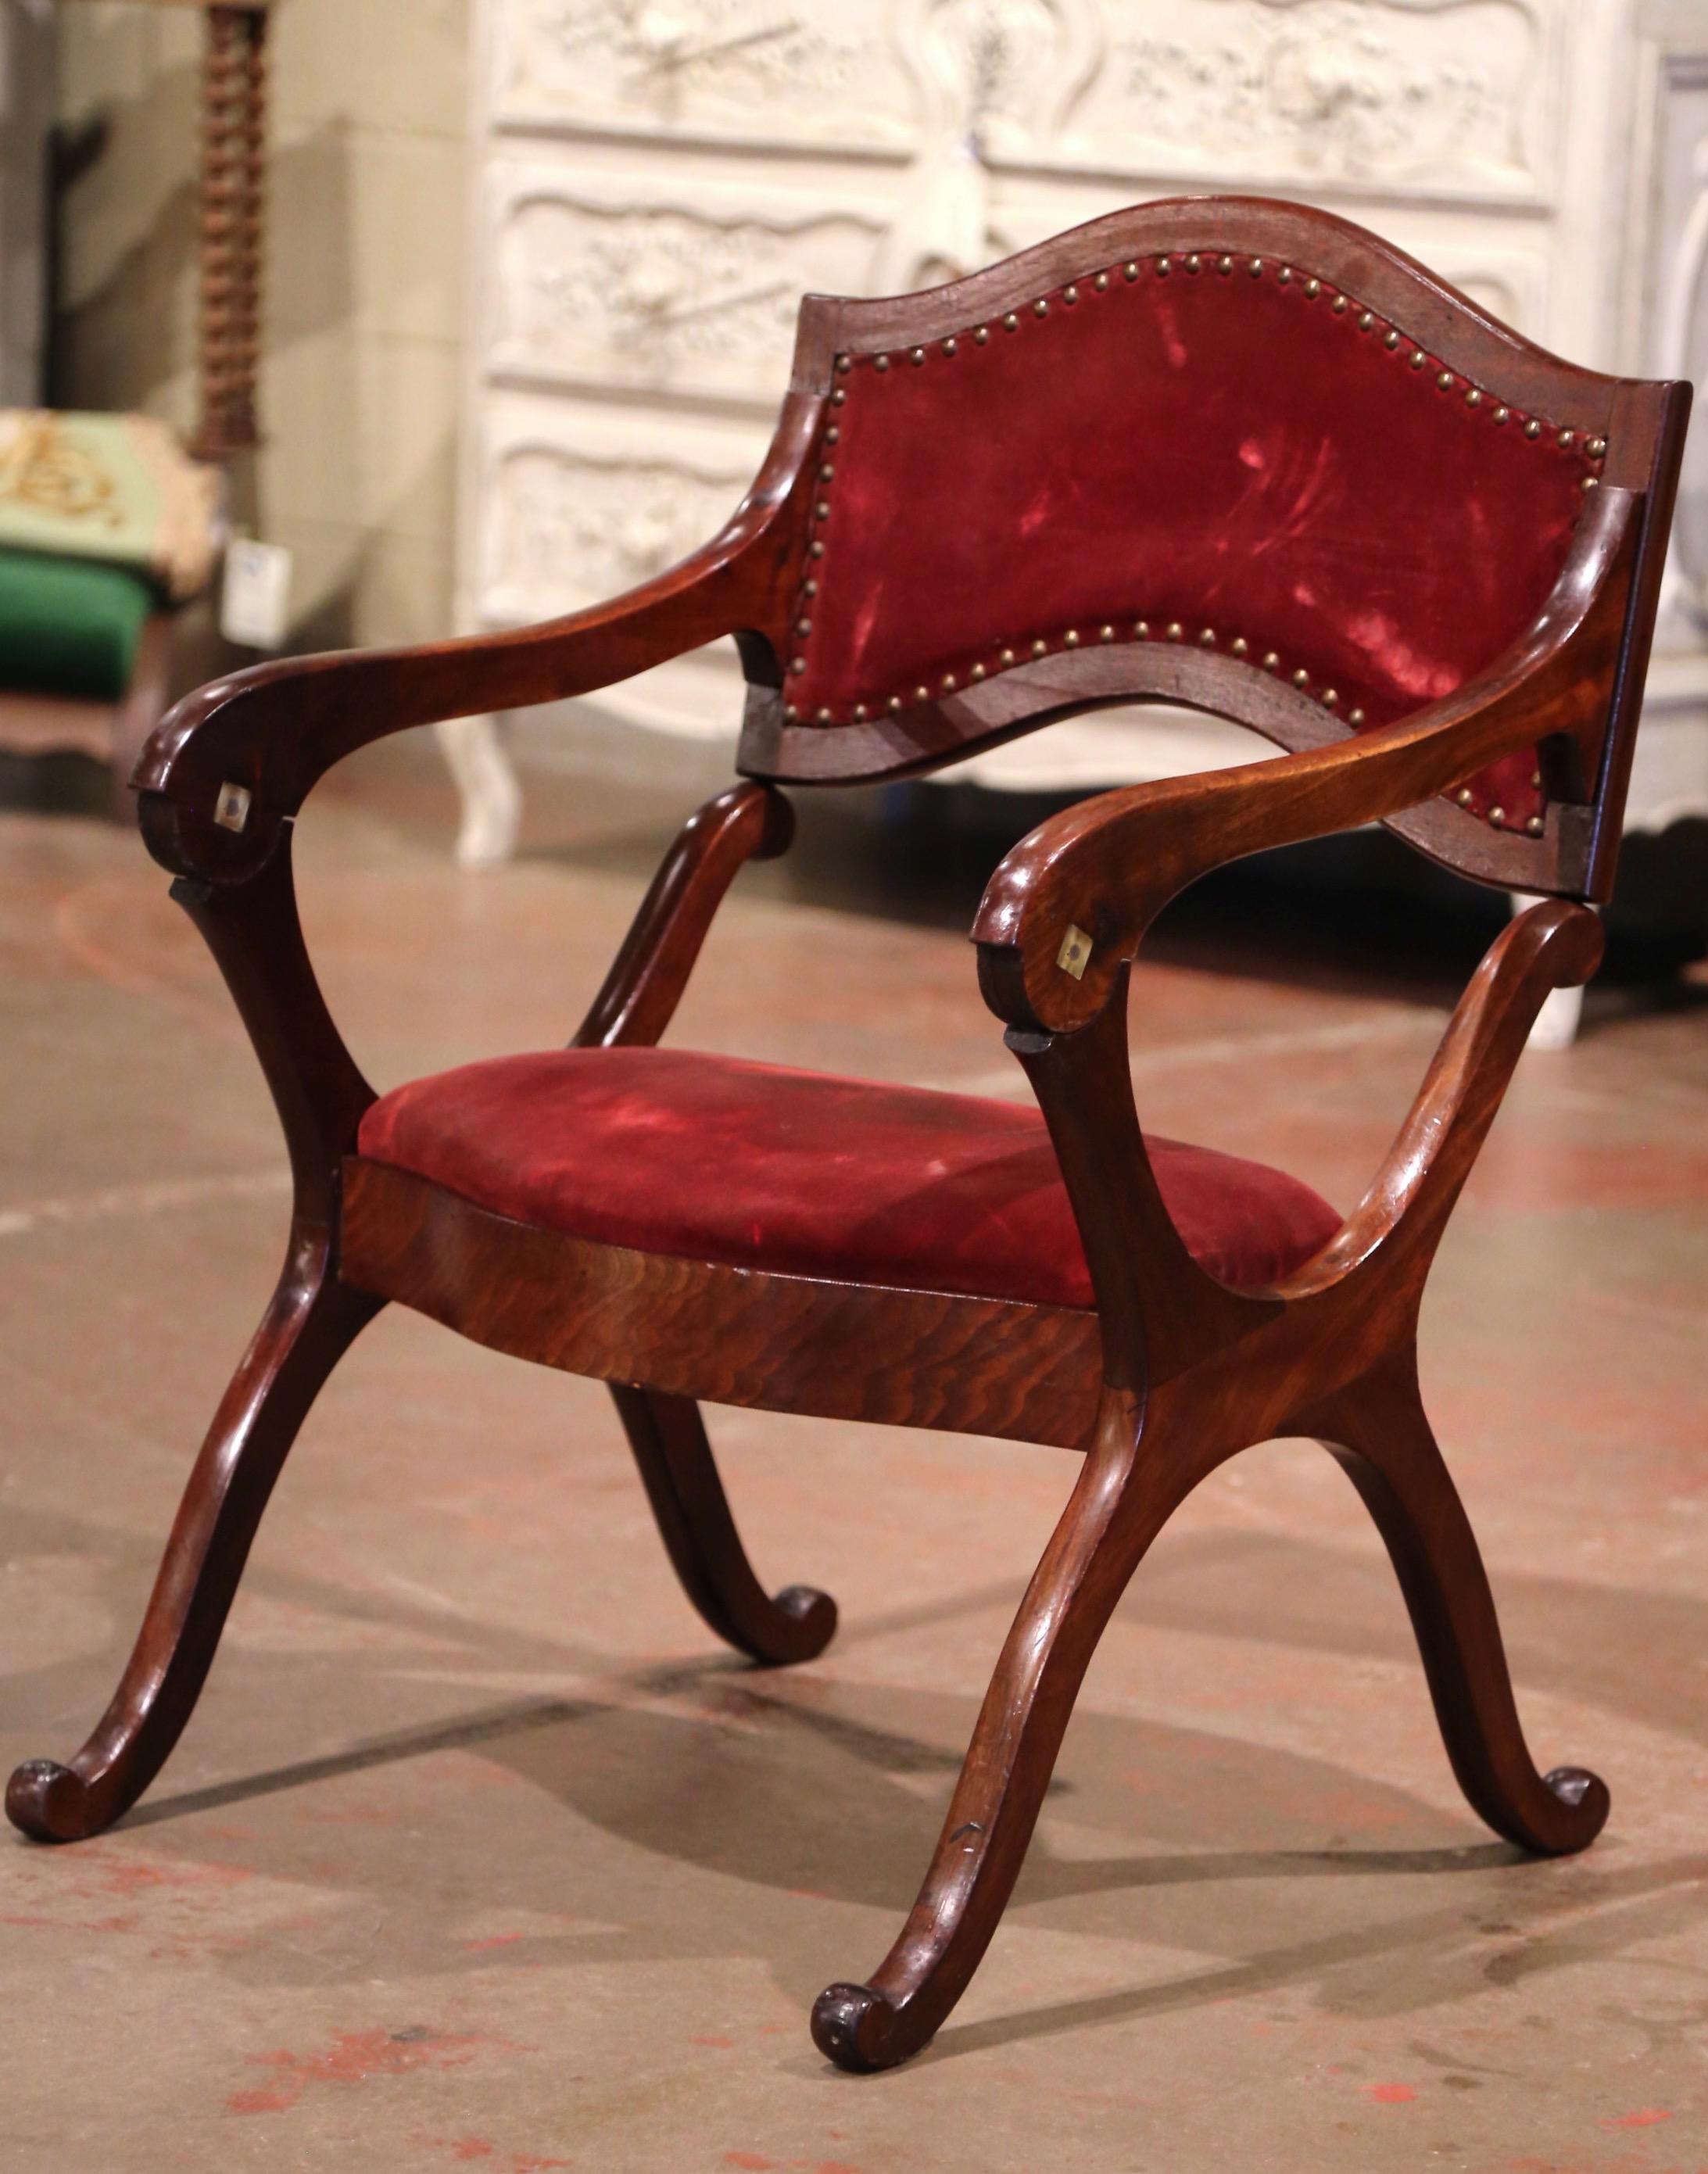 This rare, carved fruitwood “Prie-Dieu” (prayer chair in French), was crafted in France, circa 1880. The unique, antique chair is easily transformed and can open up to a tall prayer bench. The Louis Philippe kneeler stands on four curved legs with